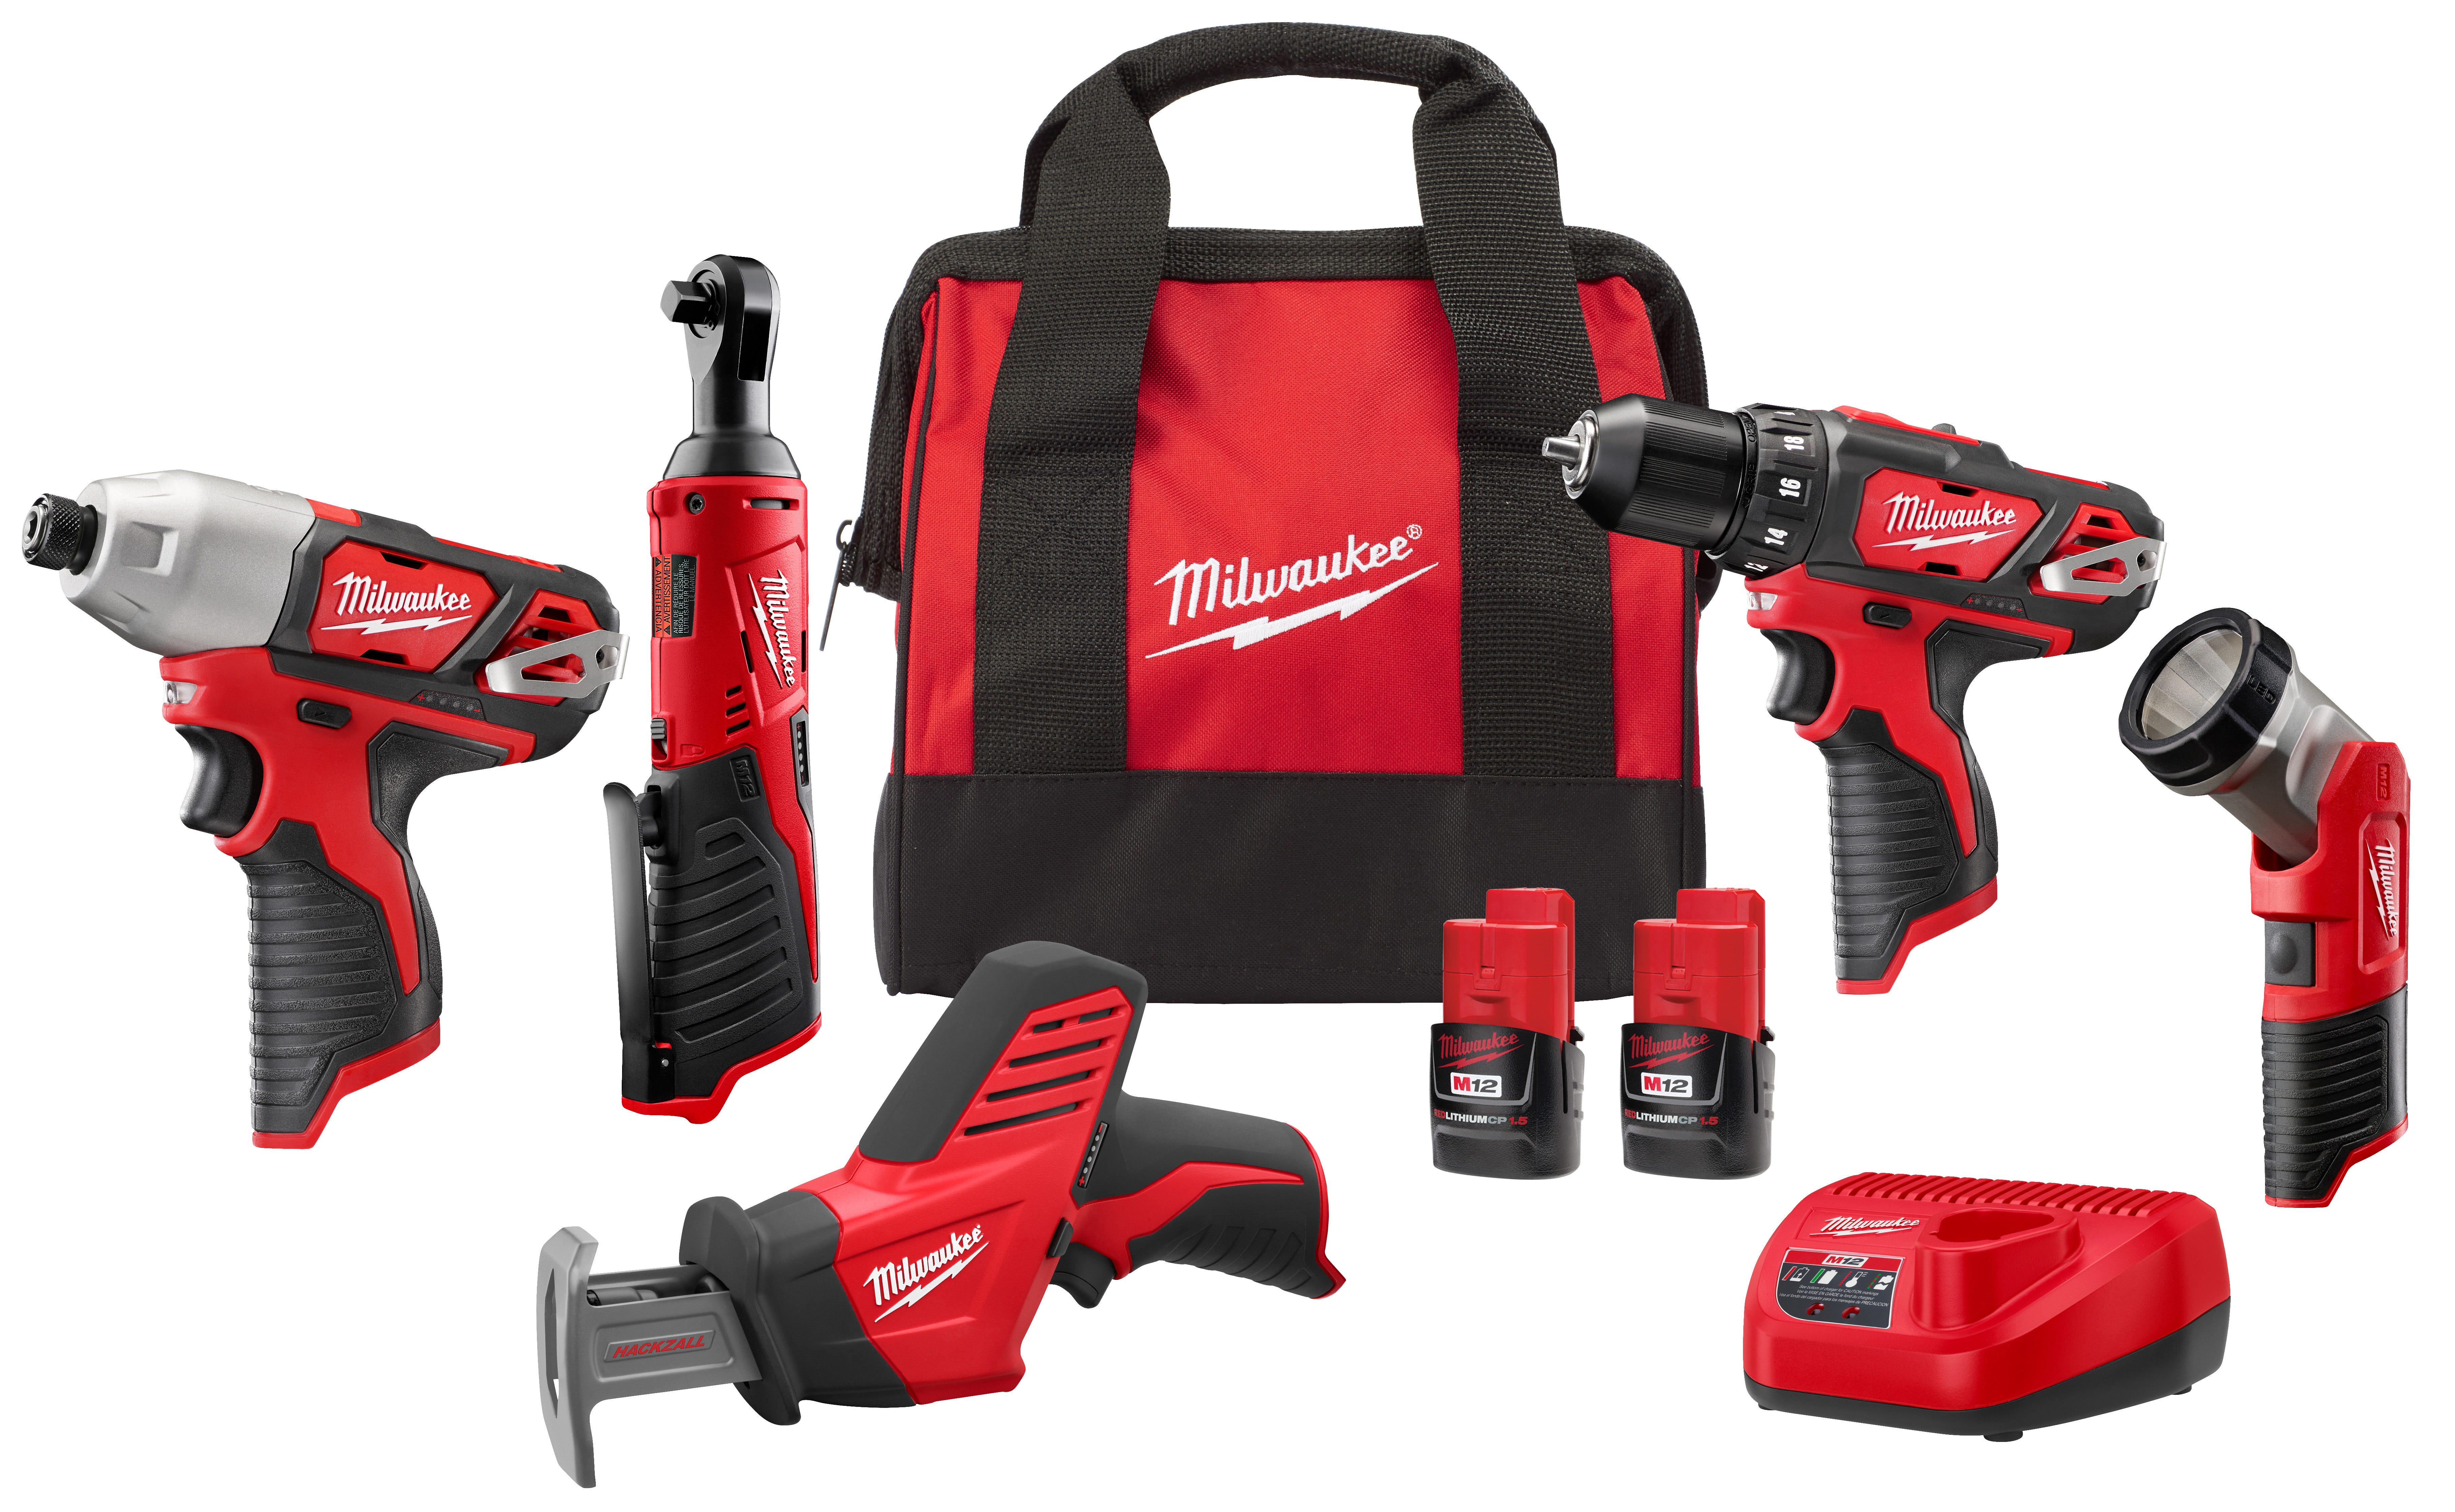 Milwaukee M12 12-Volt Lithium-Ion Cordless Jigsaw and Oscillating Multi-Tool Kit with Two 1.5Ah Batteries, Charger and Tool Bag - 4